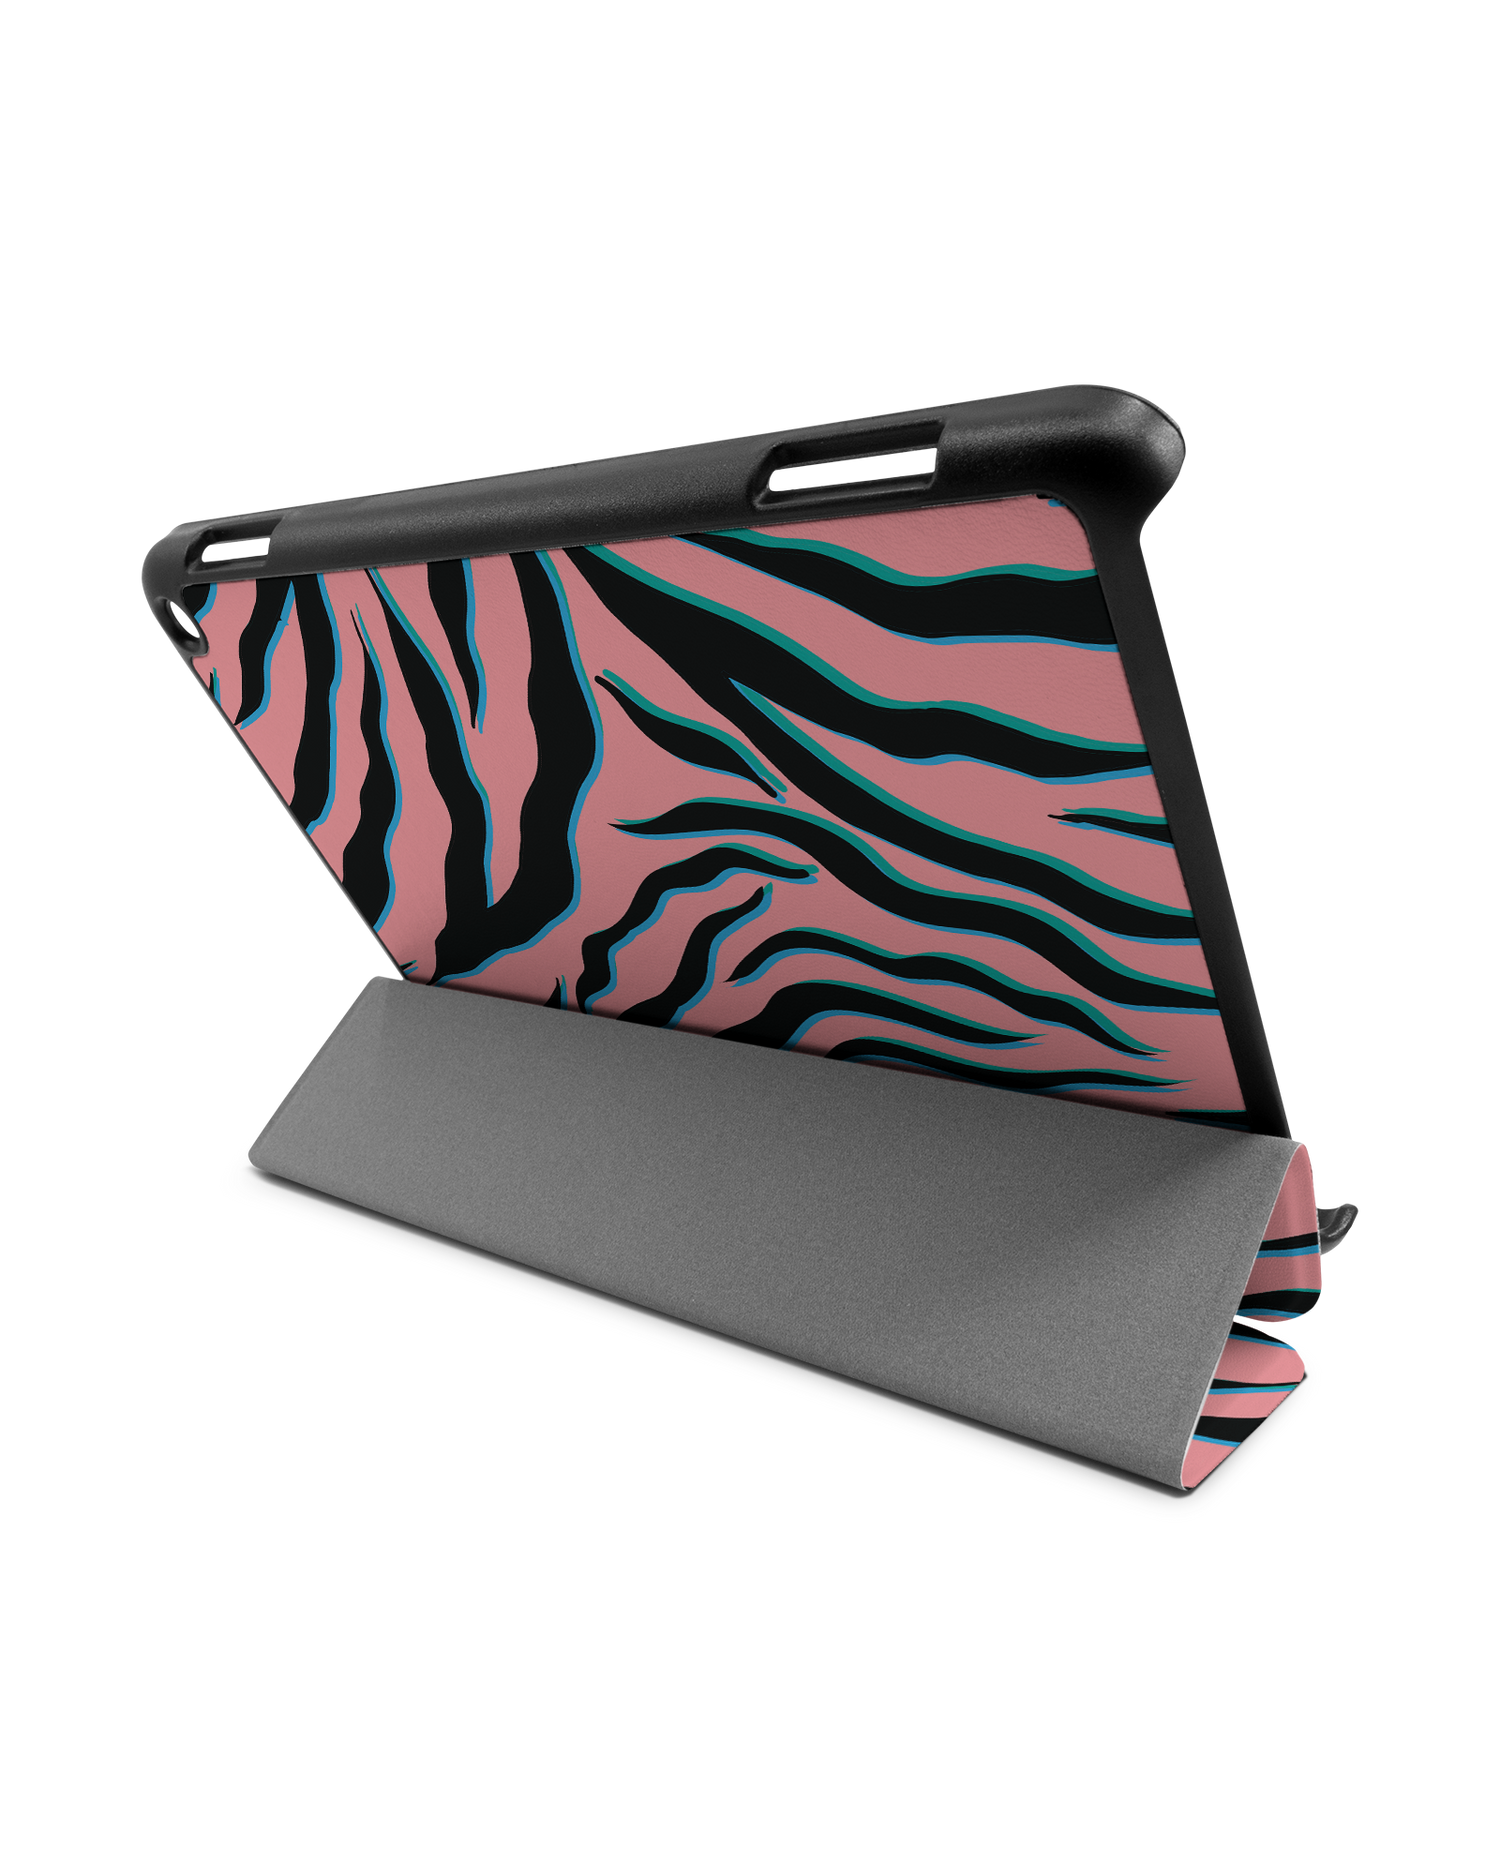 Pink Zebra Tablet Smart Case for Amazon Fire HD 8 (2022), Amazon Fire HD 8 Plus (2022), Amazon Fire HD 8 (2020), Amazon Fire HD 8 Plus (2020): Used as Stand